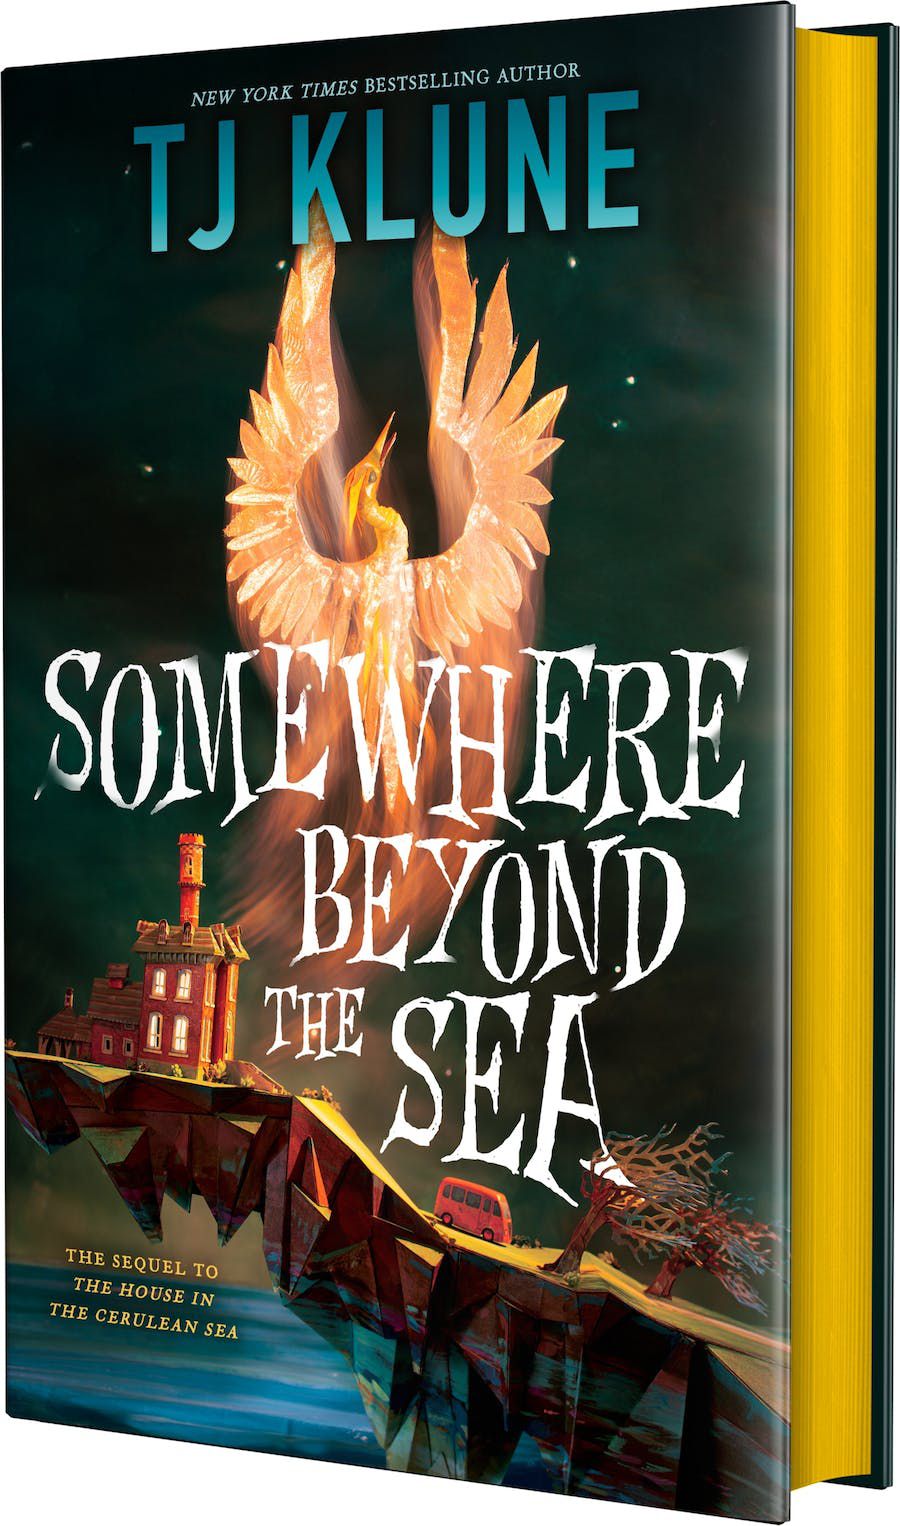 A winged creature appears to come out of a house on a cliff in the cover for TJ Klune’s Somewhere Beyond the Sea.